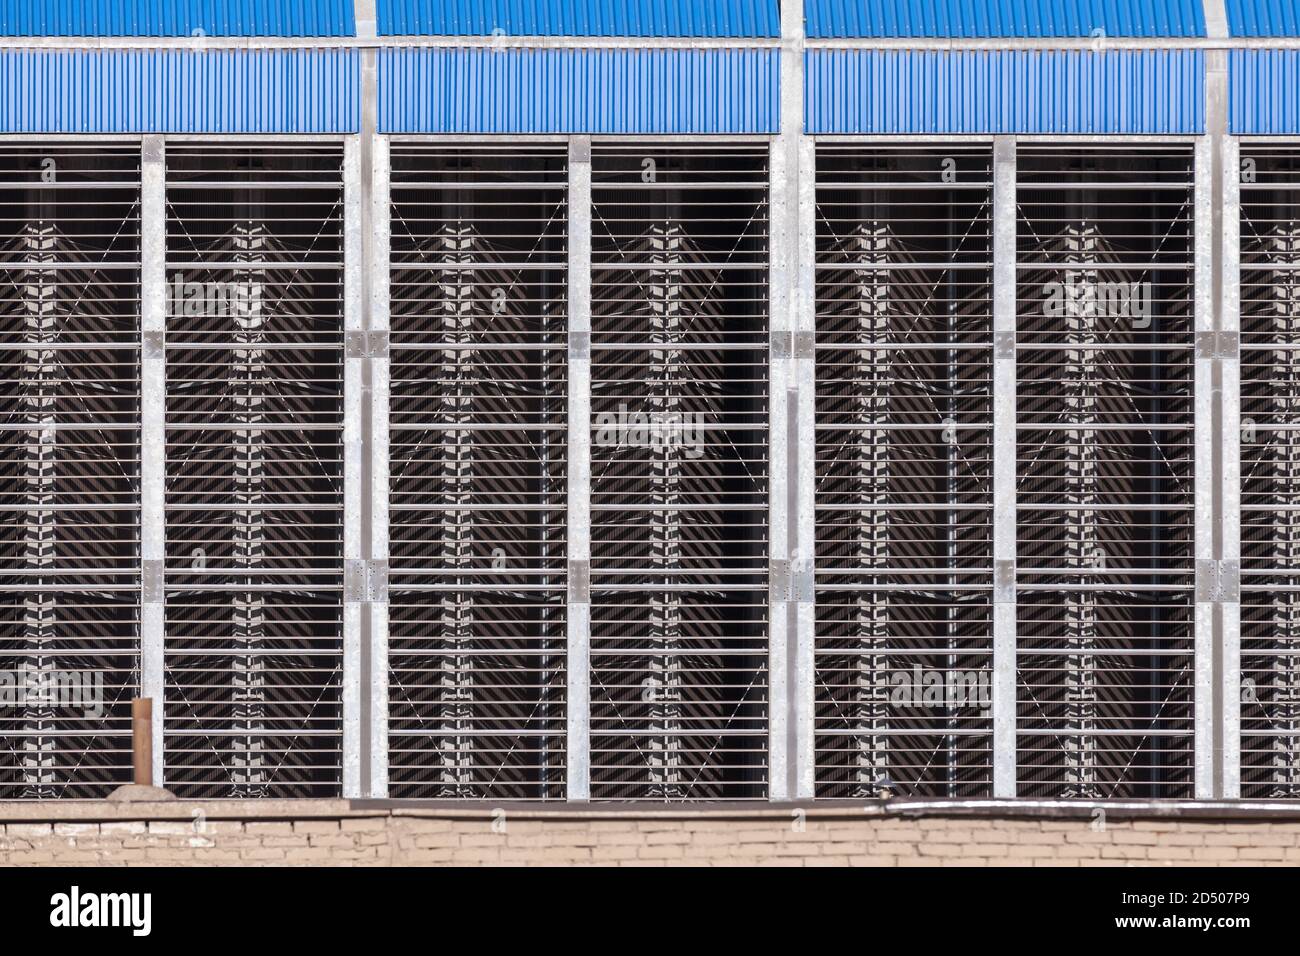 Industrial metal wall with cooling grates, flat background photo texture Stock Photo